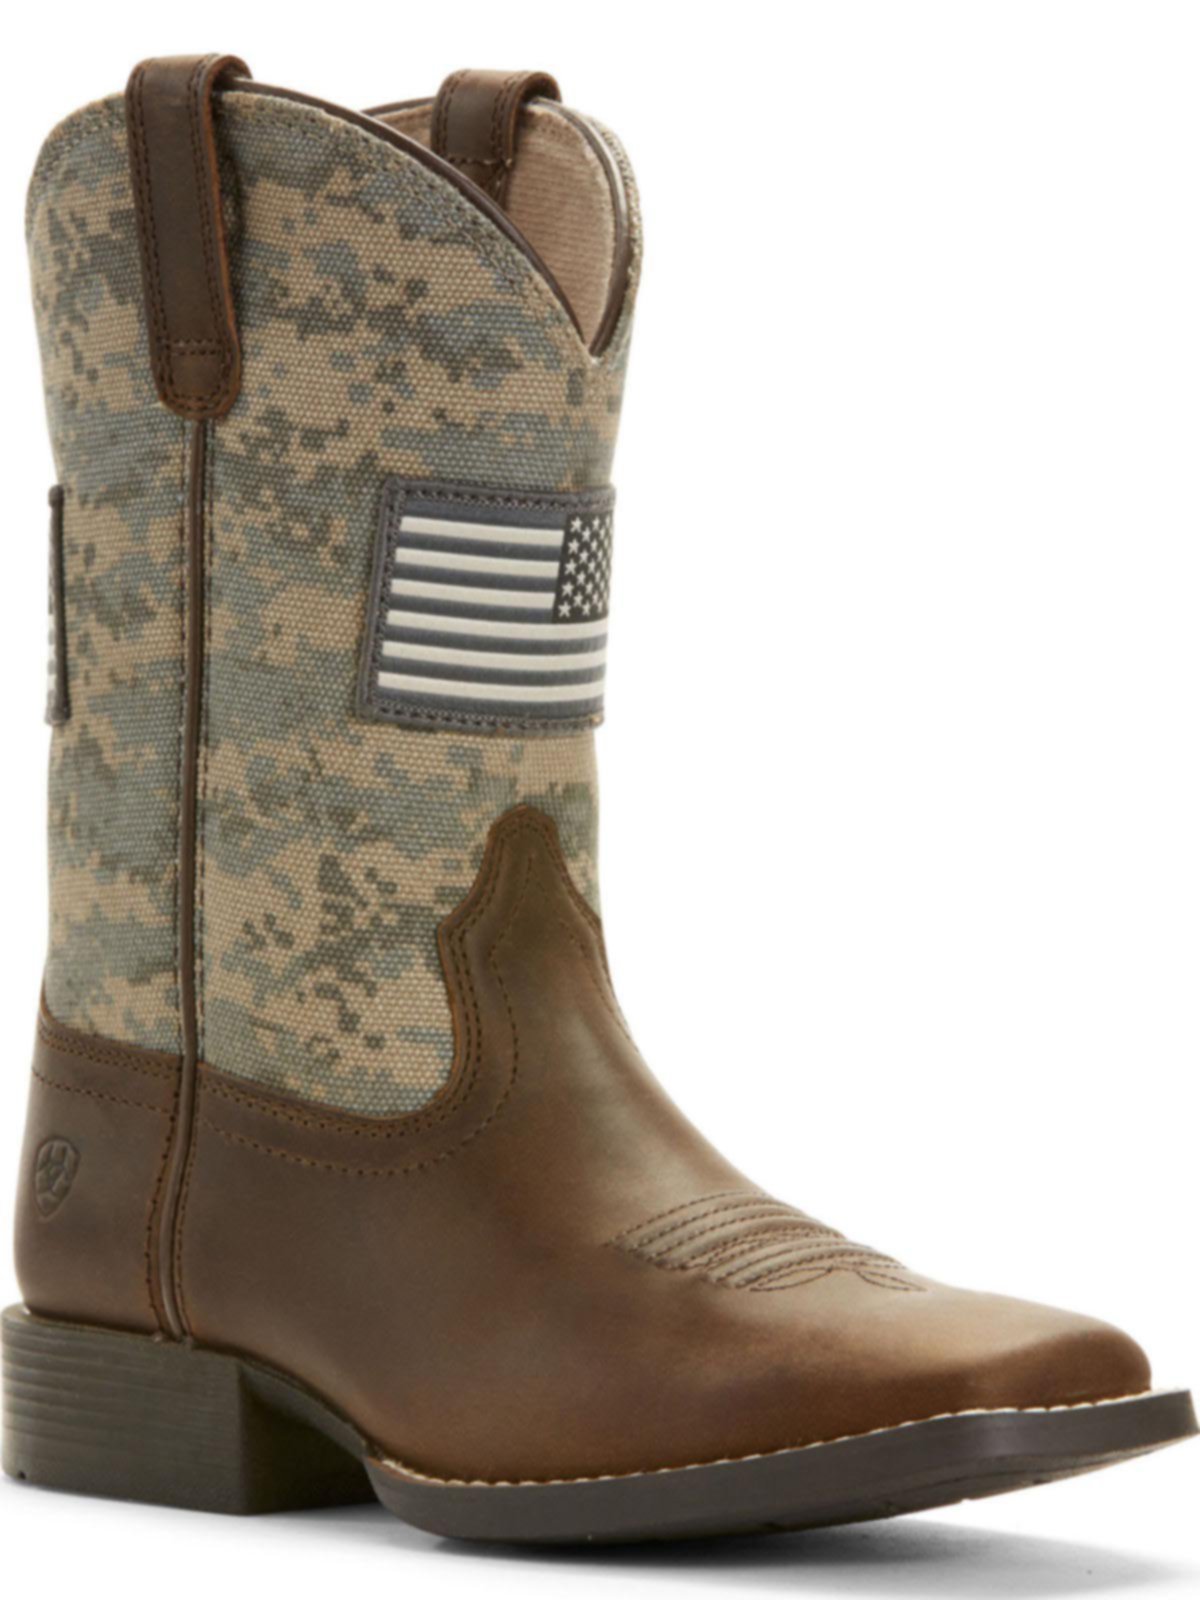 camo boots with american flag